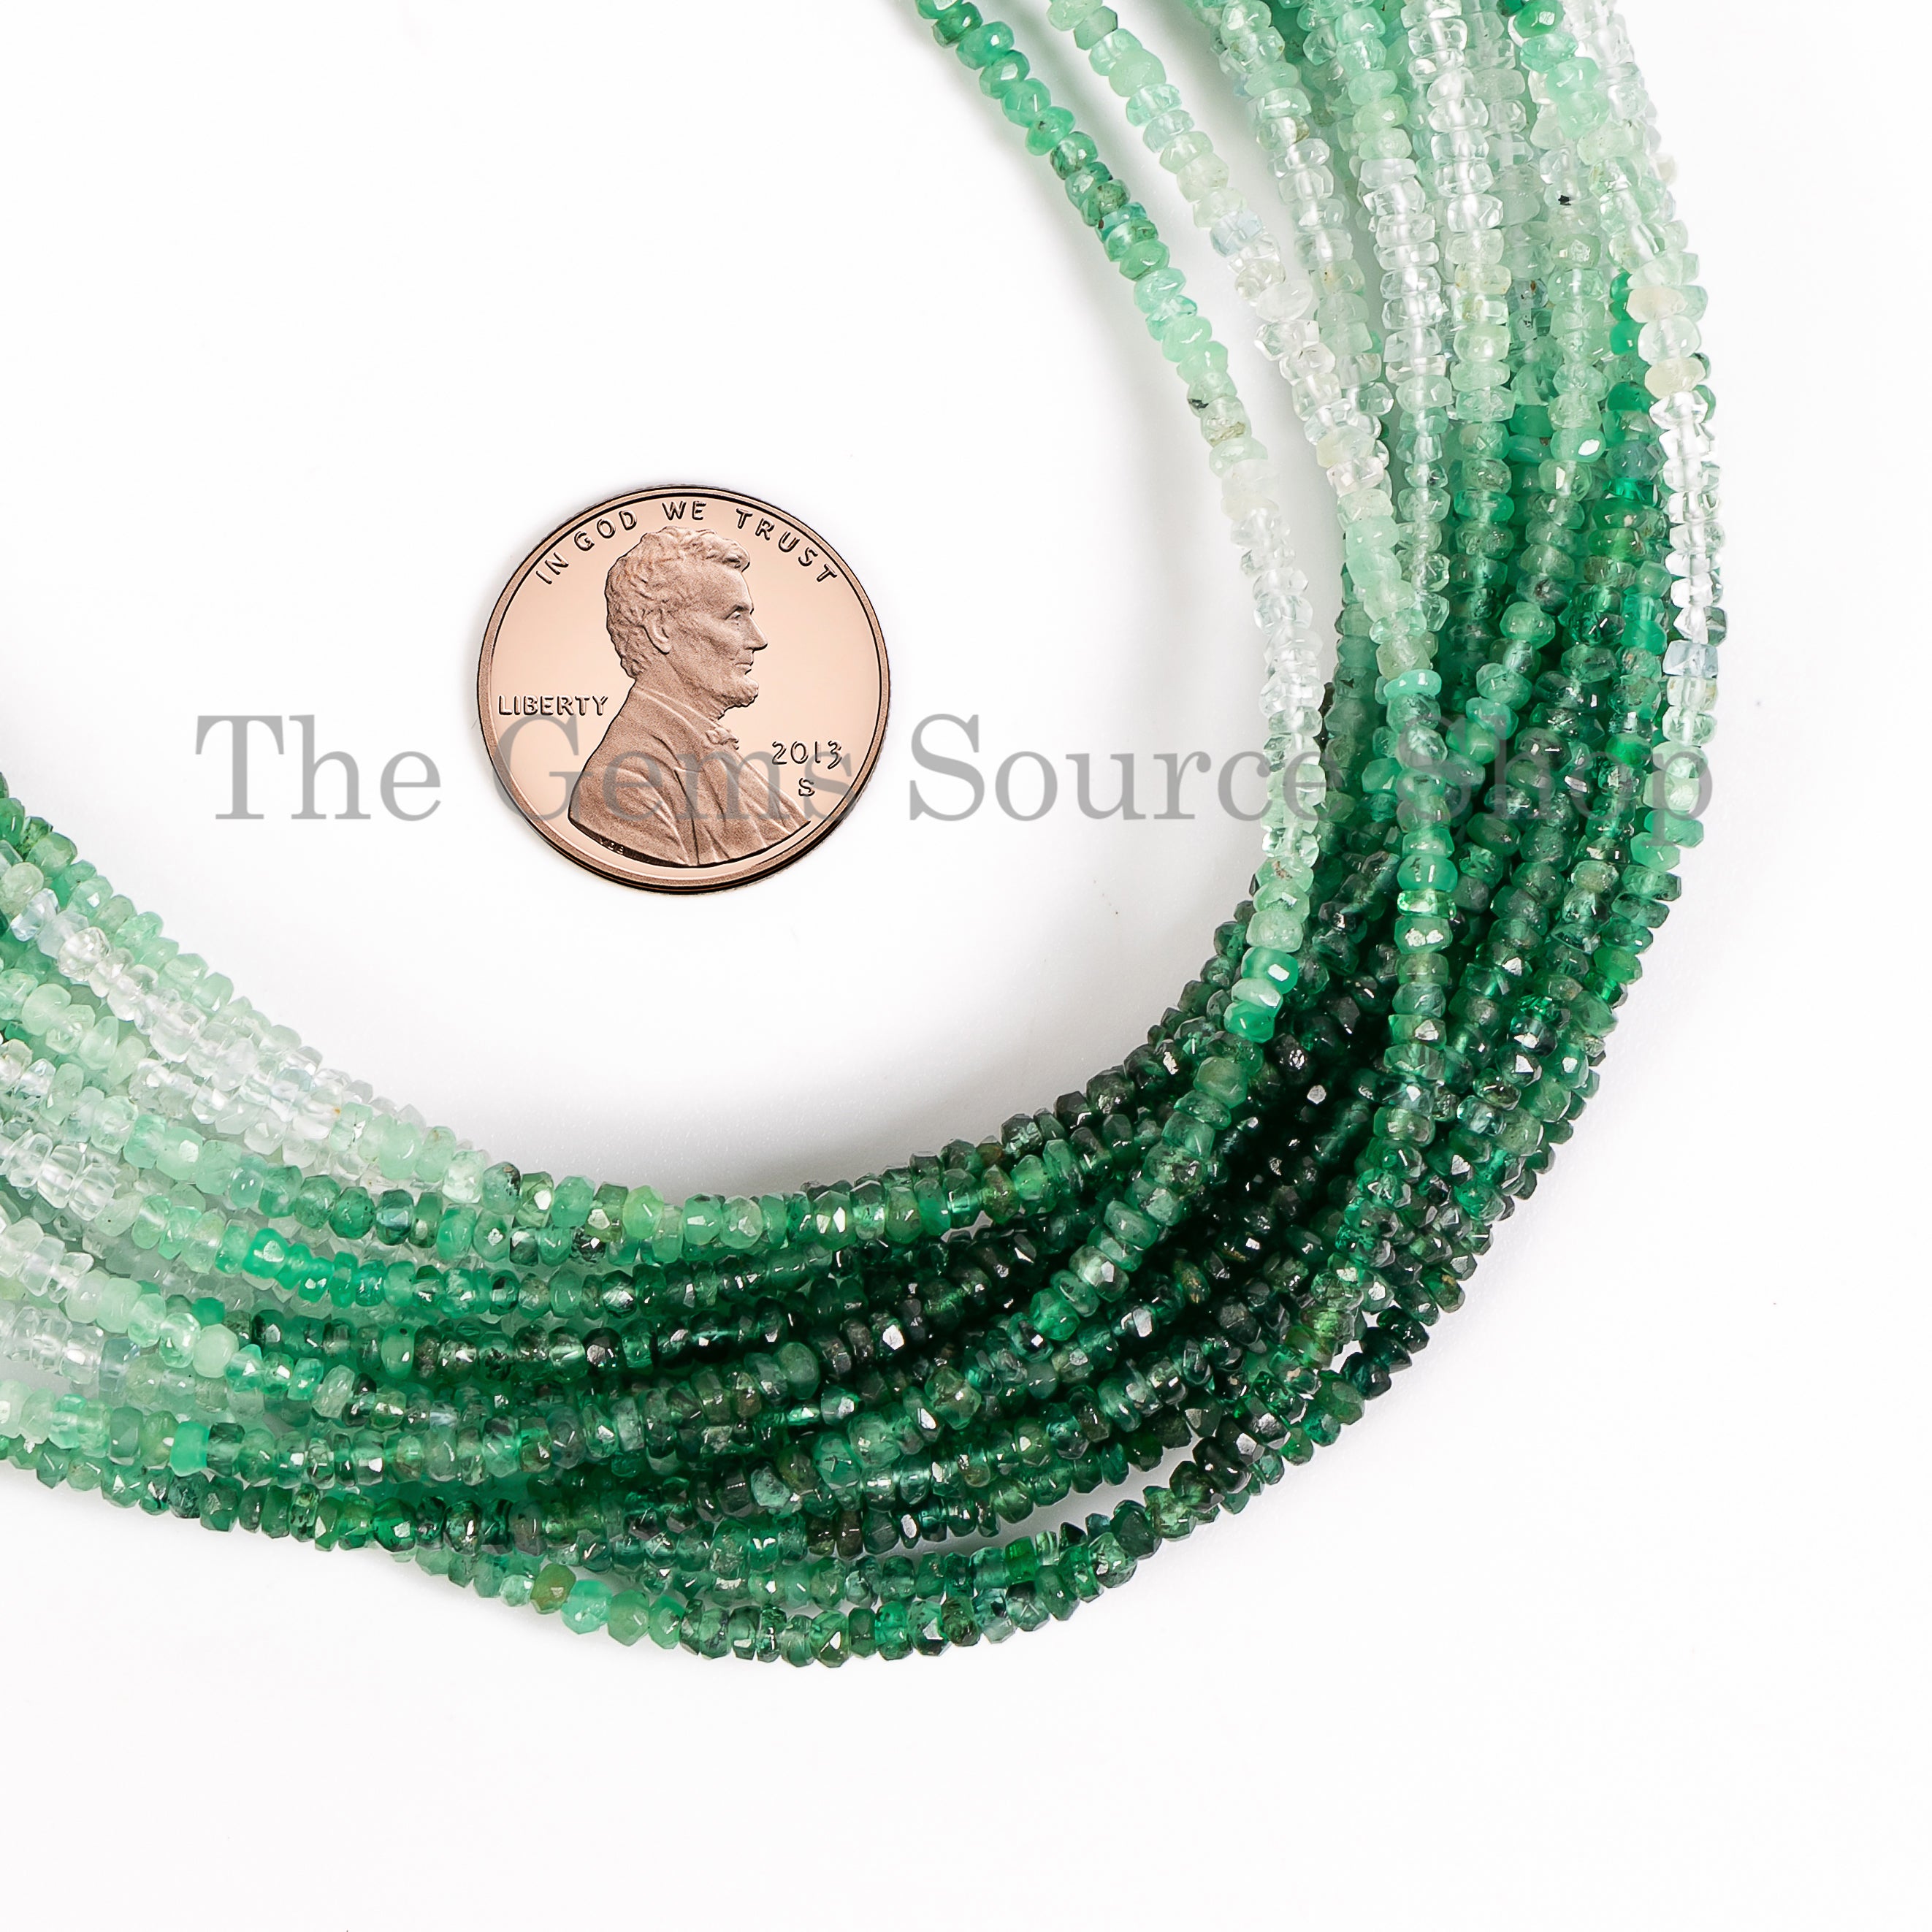 2-2.75 mm Shaded Emerald Briolette Beads, Shaded Emerald Faceted Rondelle Beads, Emerald Faceted Beads, Rondelle Shape Beads, Loose Emerald